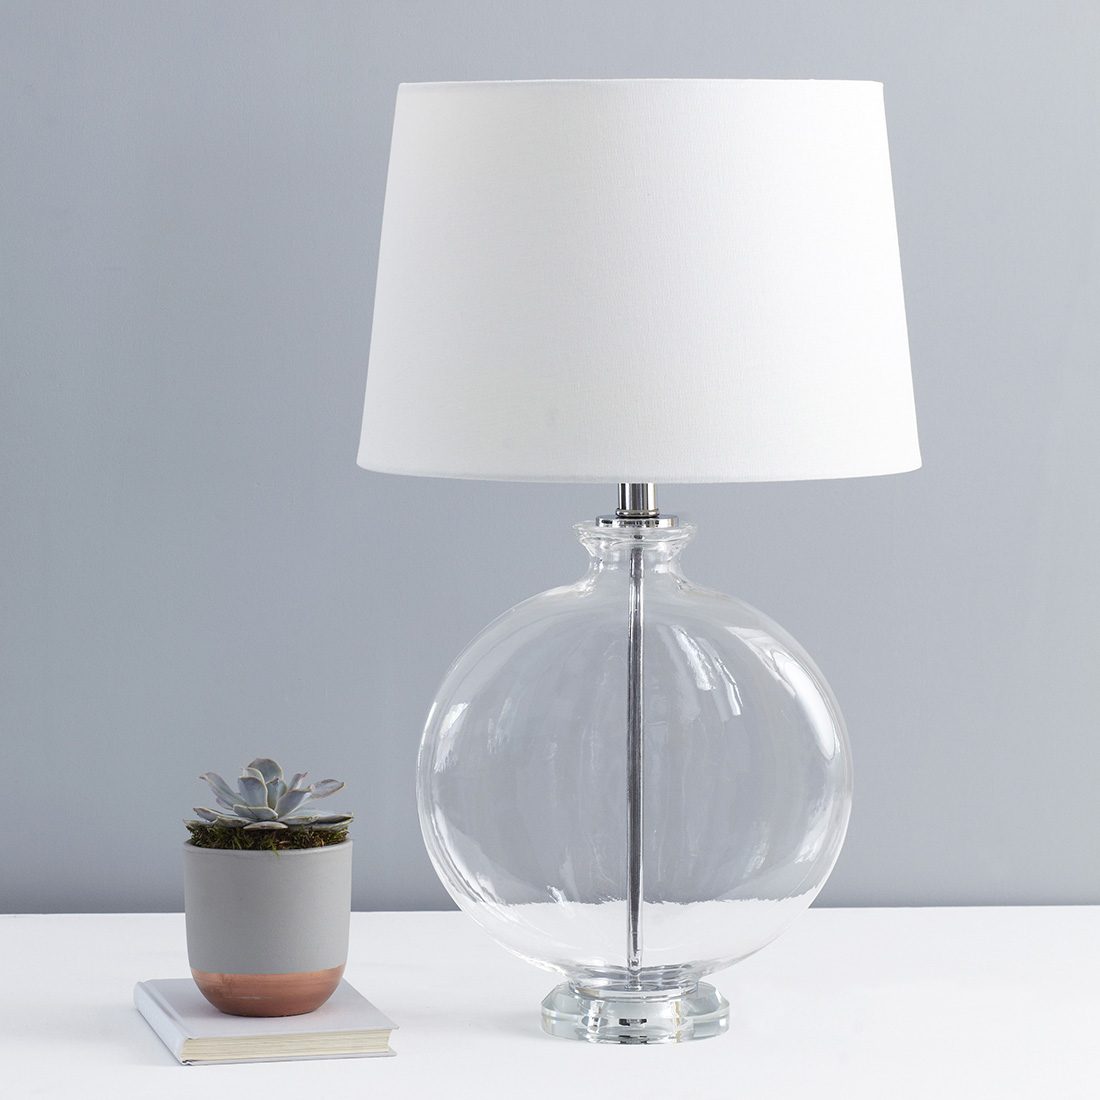 Slim Round Glass Table Lamp With White, Console Table Lamps Uk